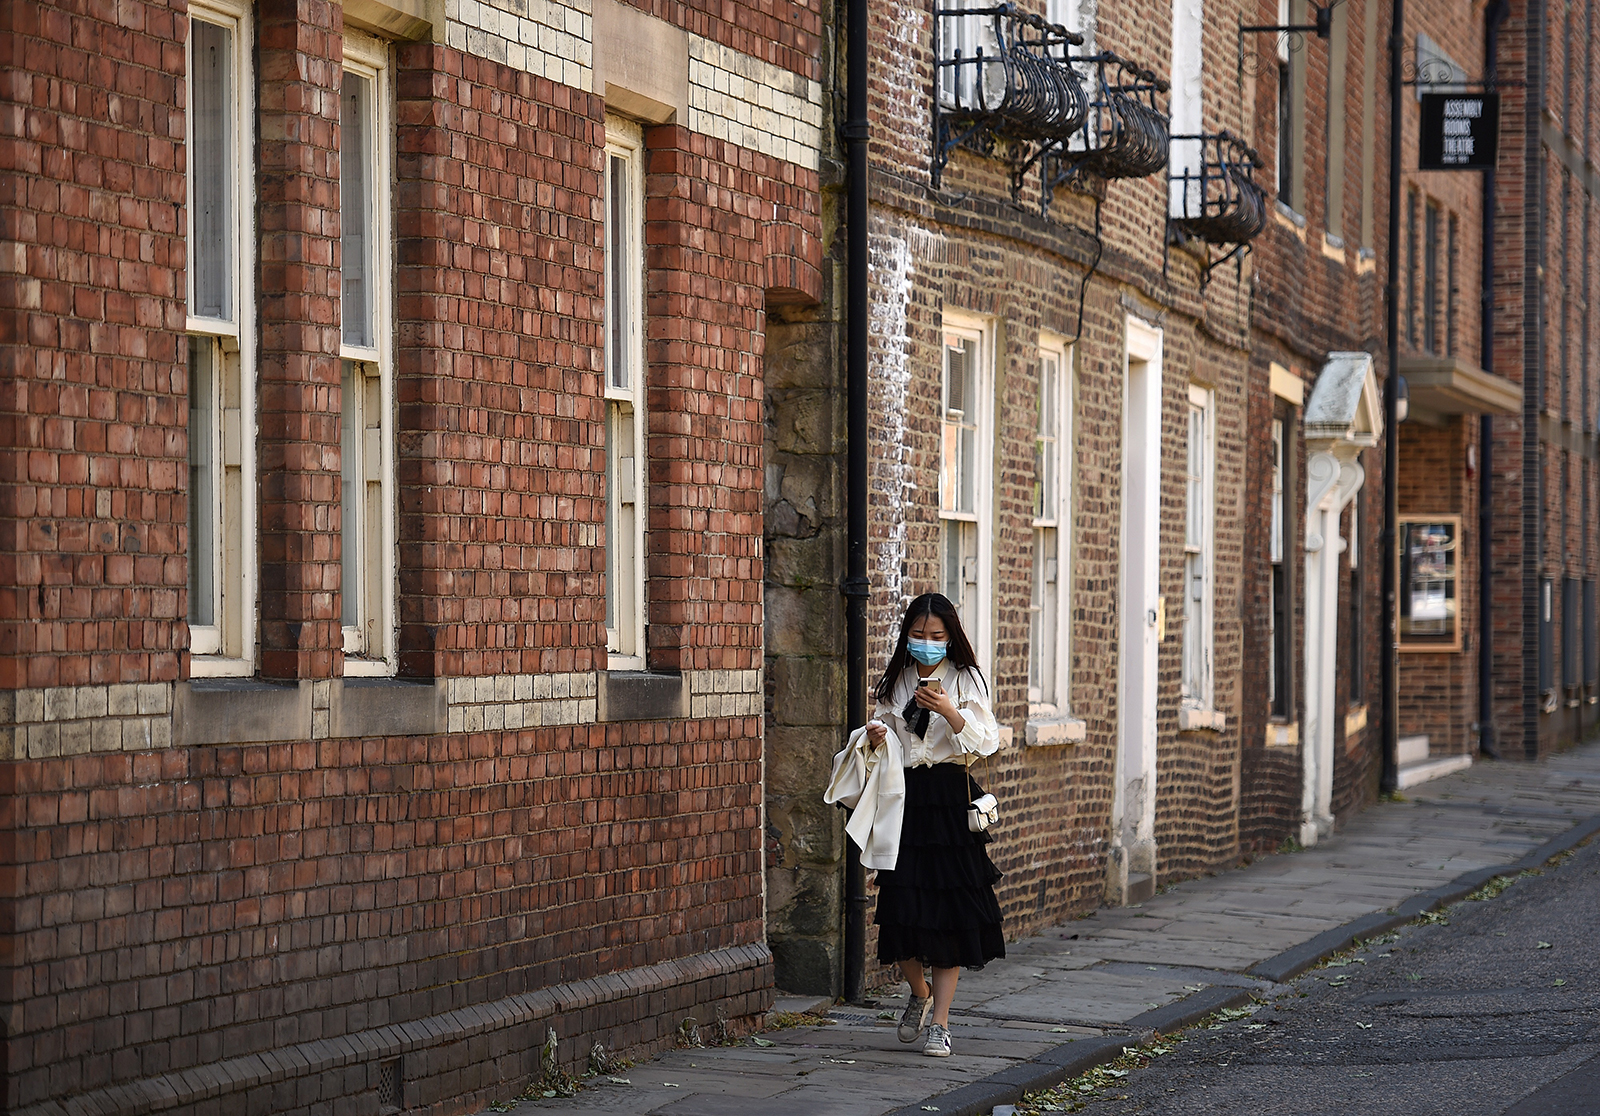 A woman wearing a face mask walks along a street in Durham, northeast of England, on May 25.